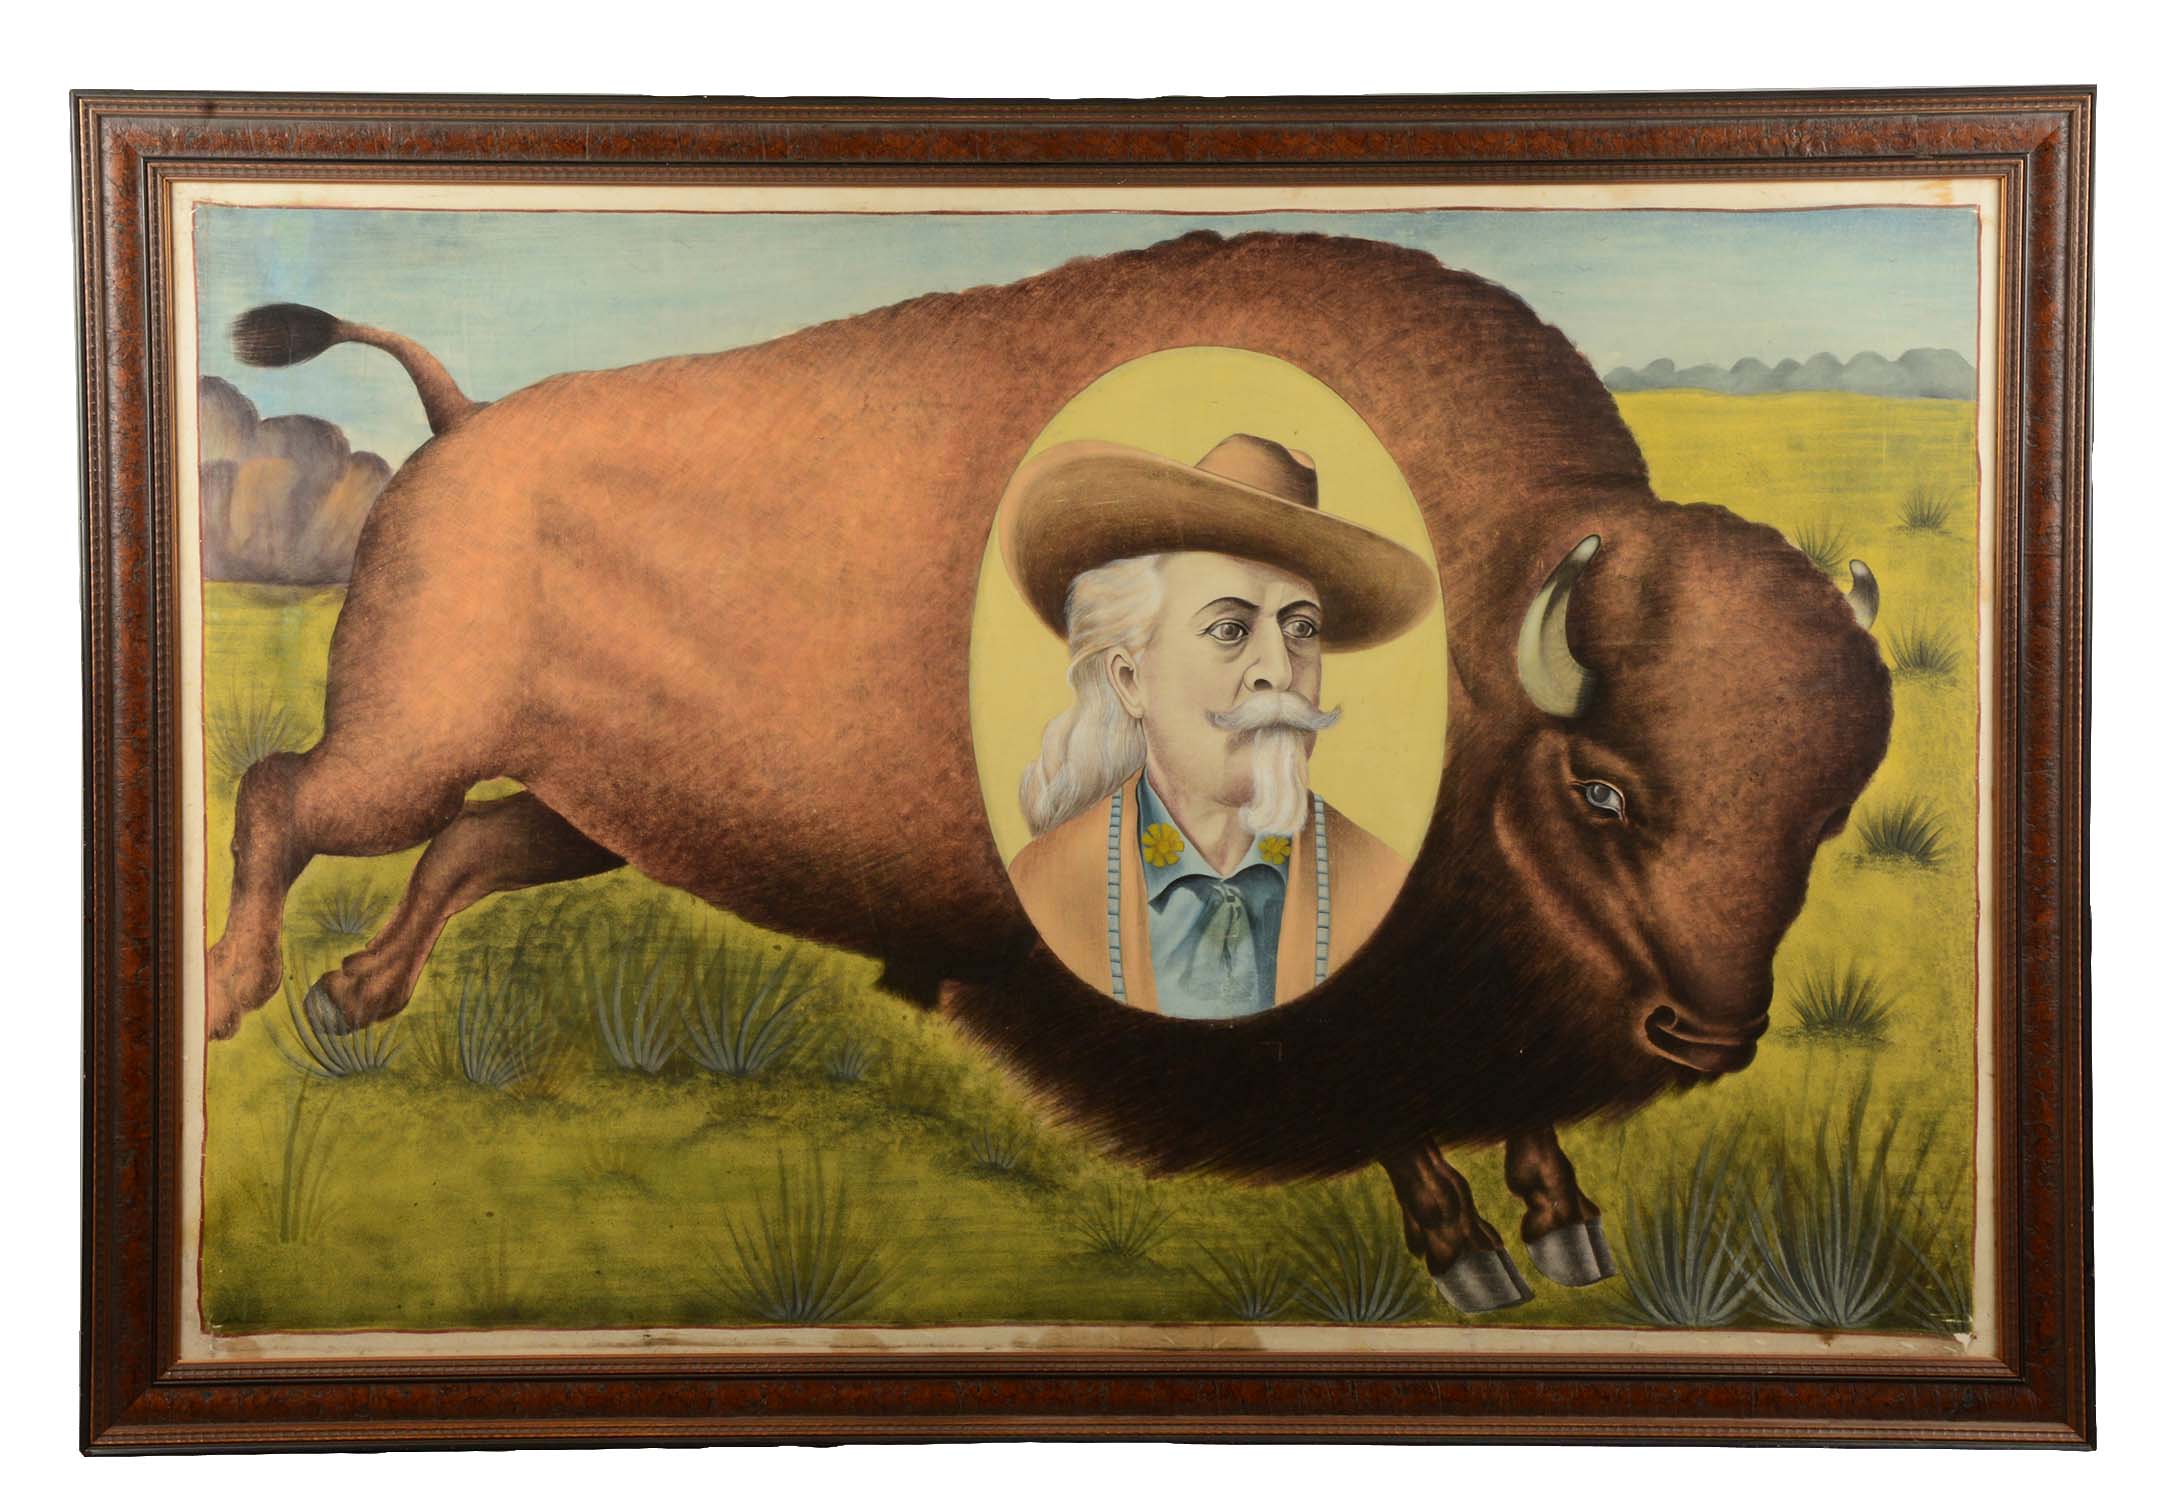 Buffalo Bill Wild West Painted Linen Banner, estimated at $15,000-25,000.